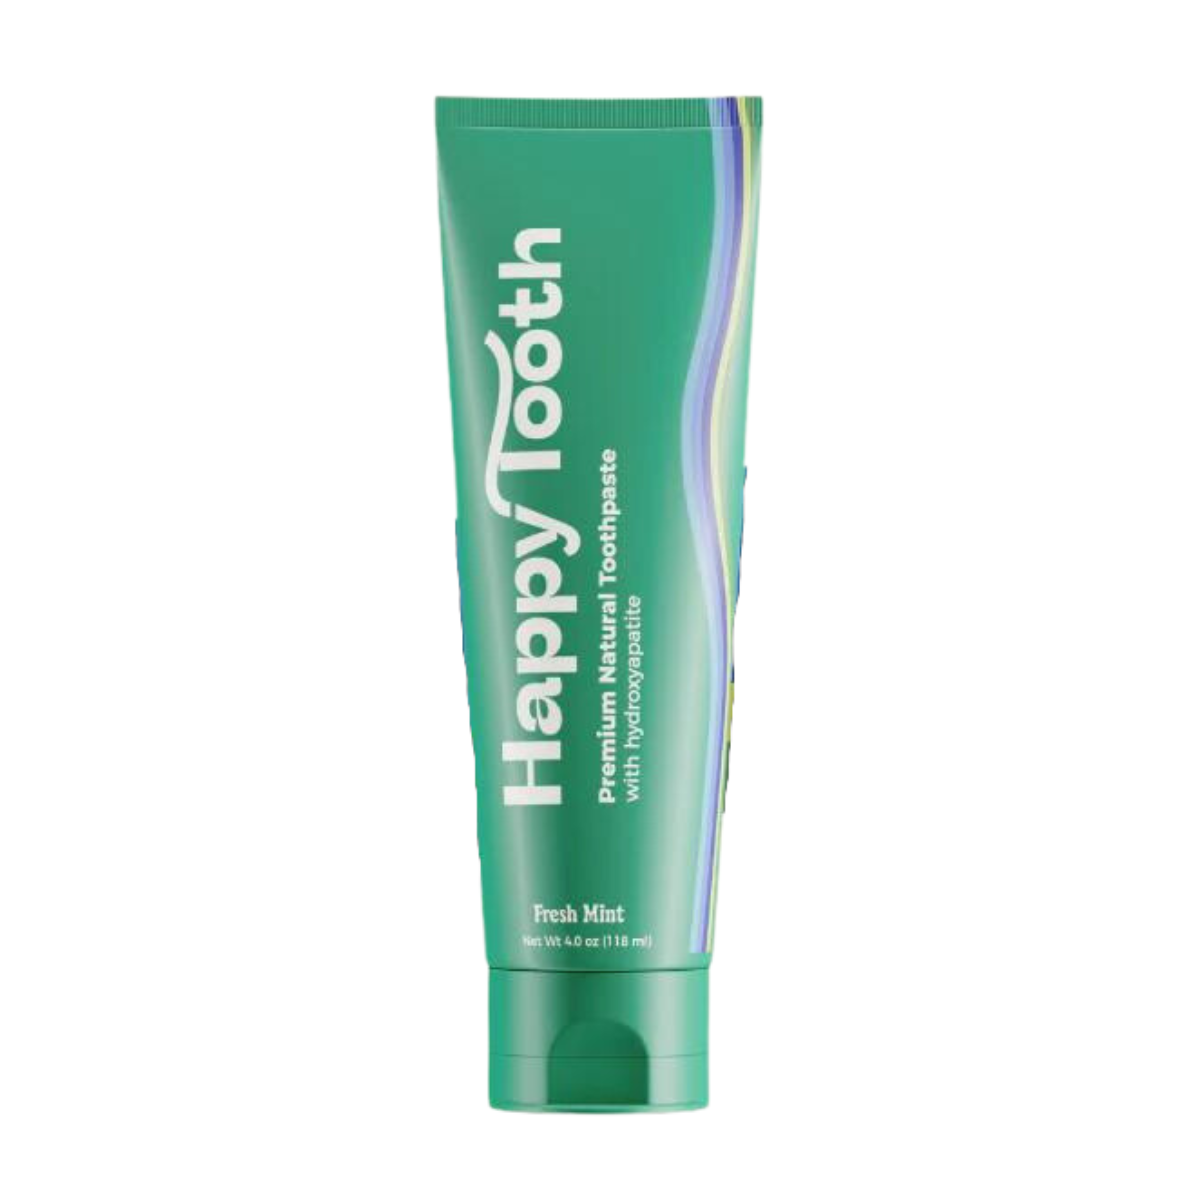 Happy Tooth Premium Natural Toothpaste with Hydroxyapatite - Fresh Mint